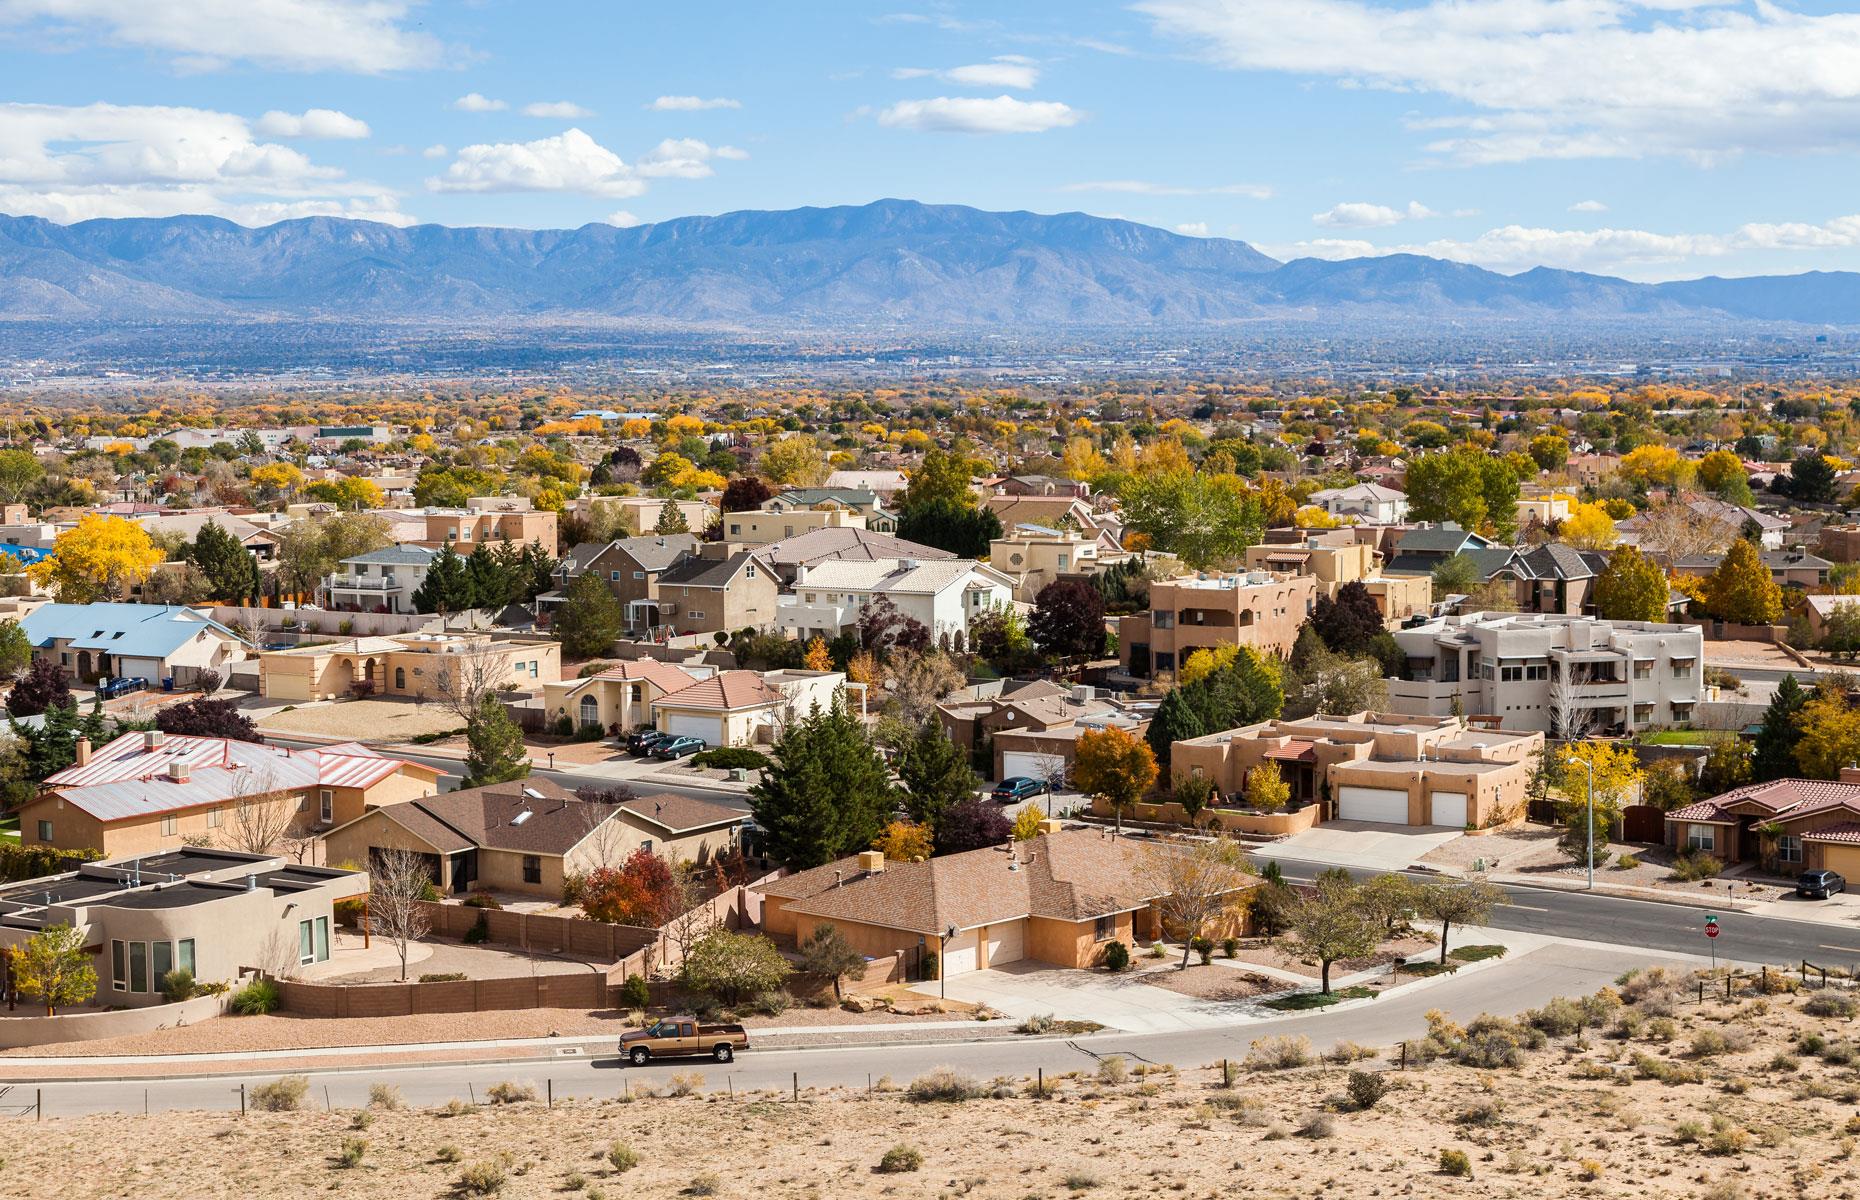 20. New Mexico, overall state tax rate: 10.54%